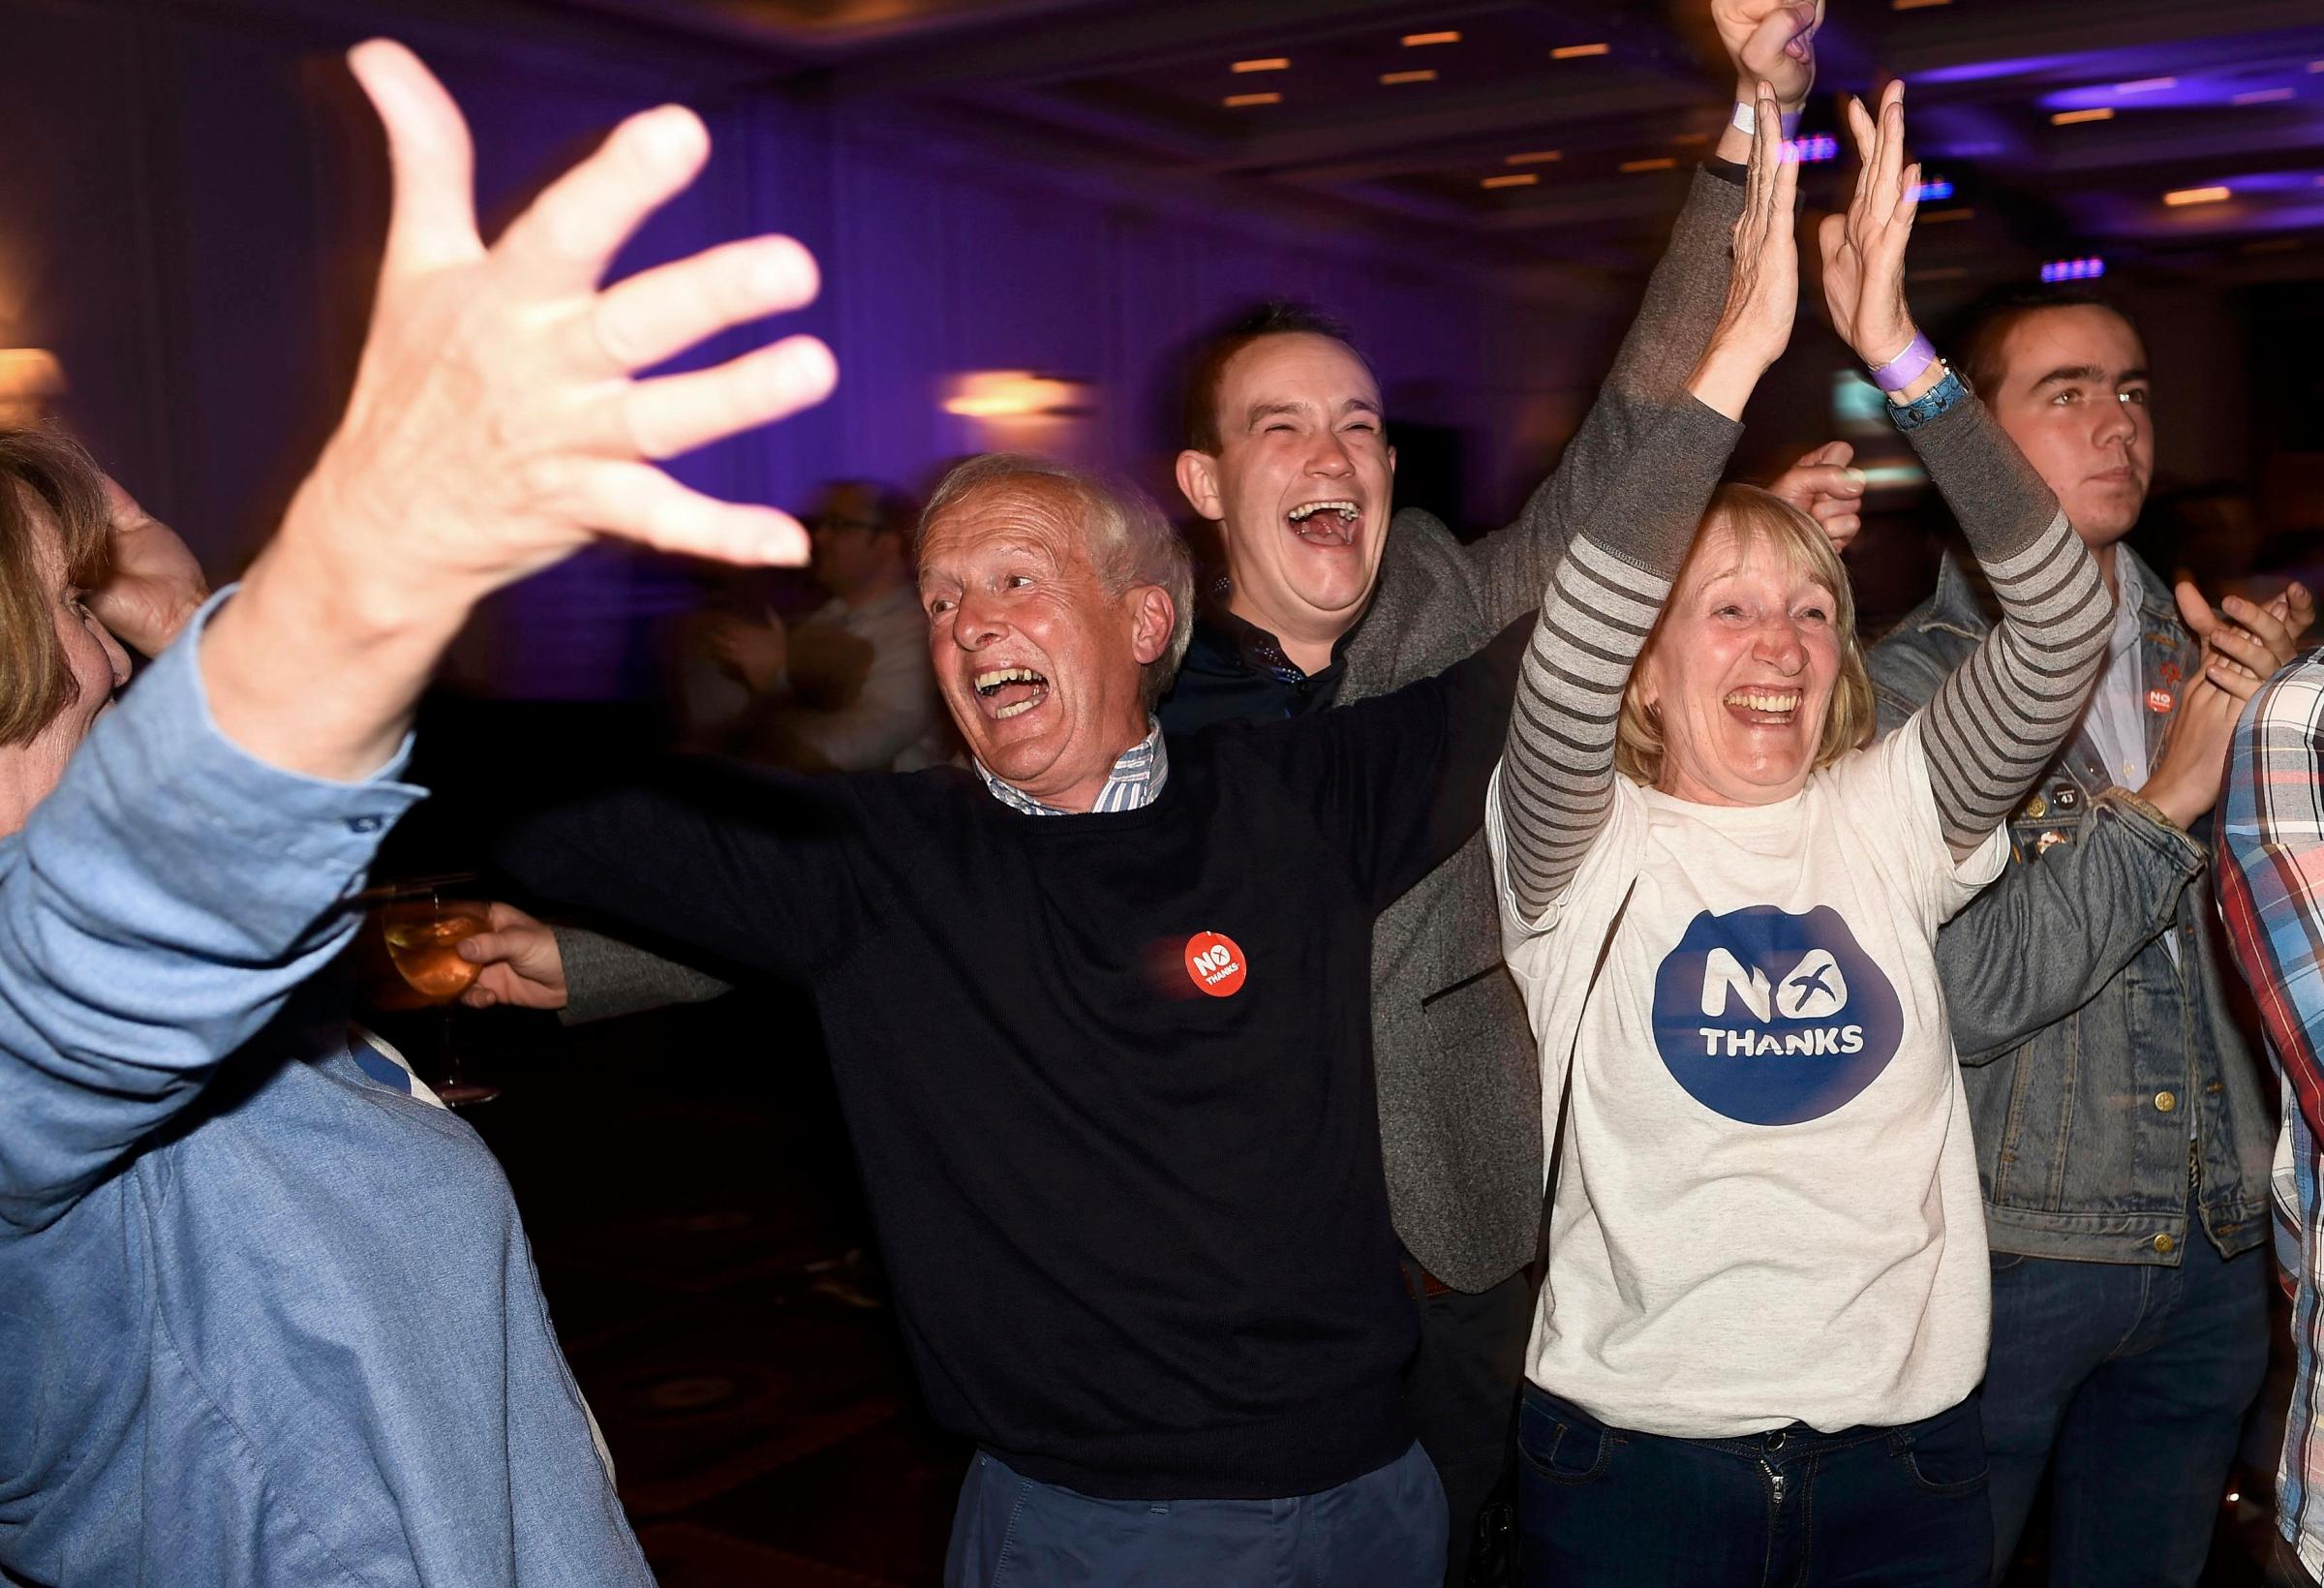 Supporters from the "No" Campaign react to a declaration in their favour, at the Better Together Campaign headquarters in Glasgow, Scotland, Sept. 19, 2014.